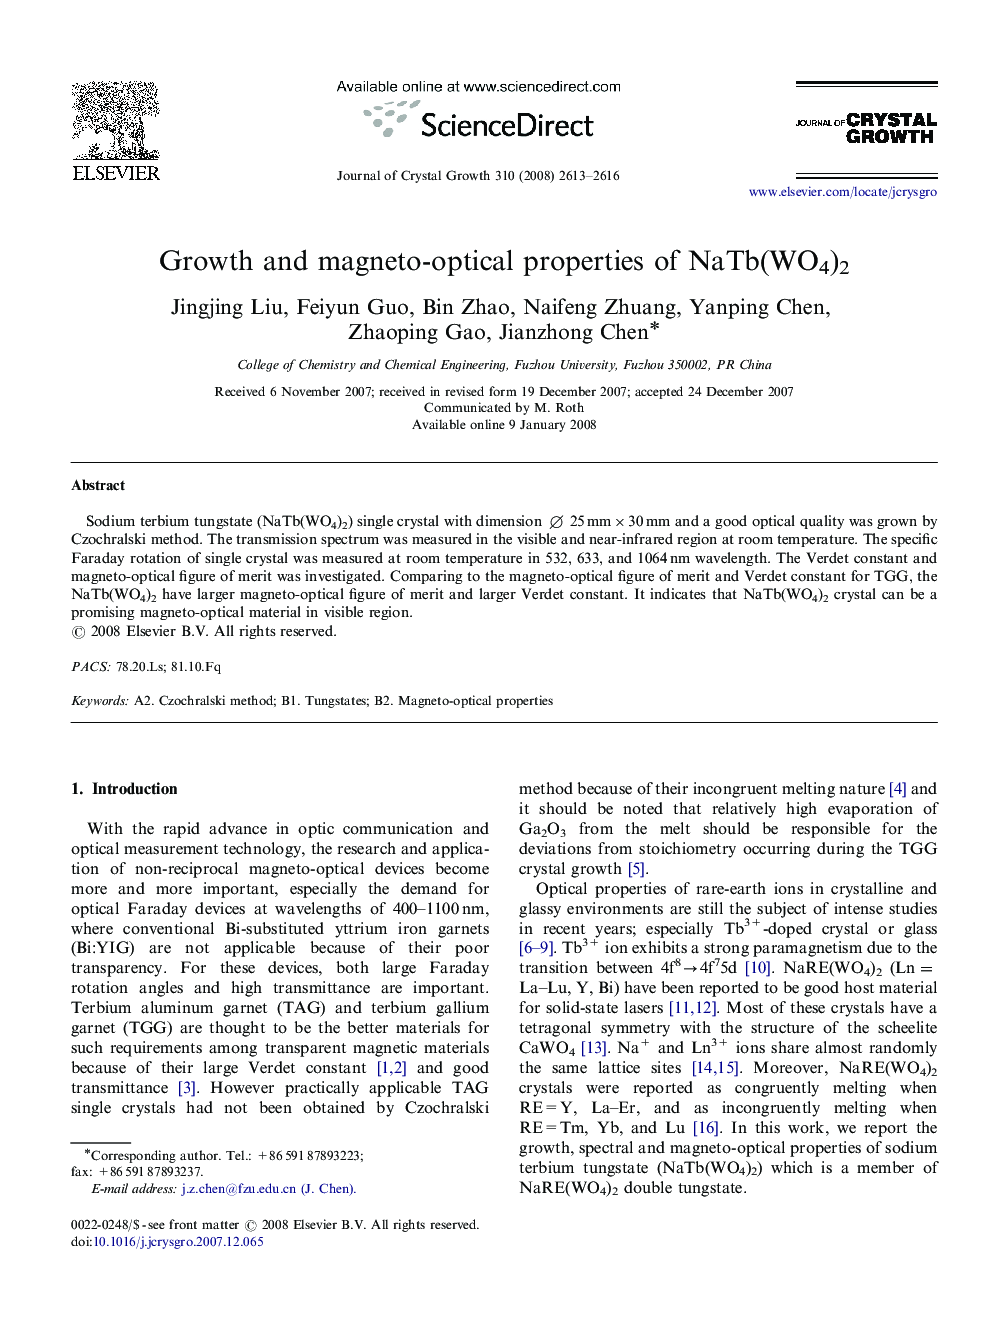 Growth and magneto-optical properties of NaTb(WO4)2